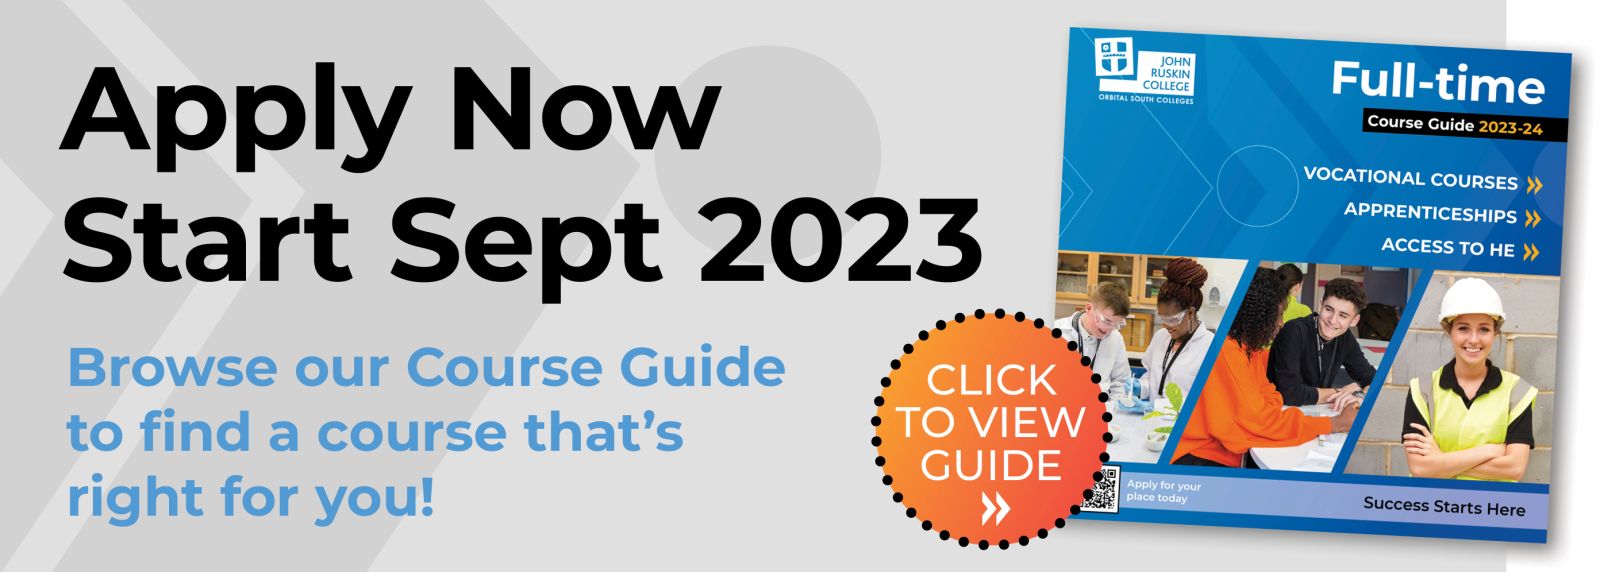 Apply now for a full time course for september 2023